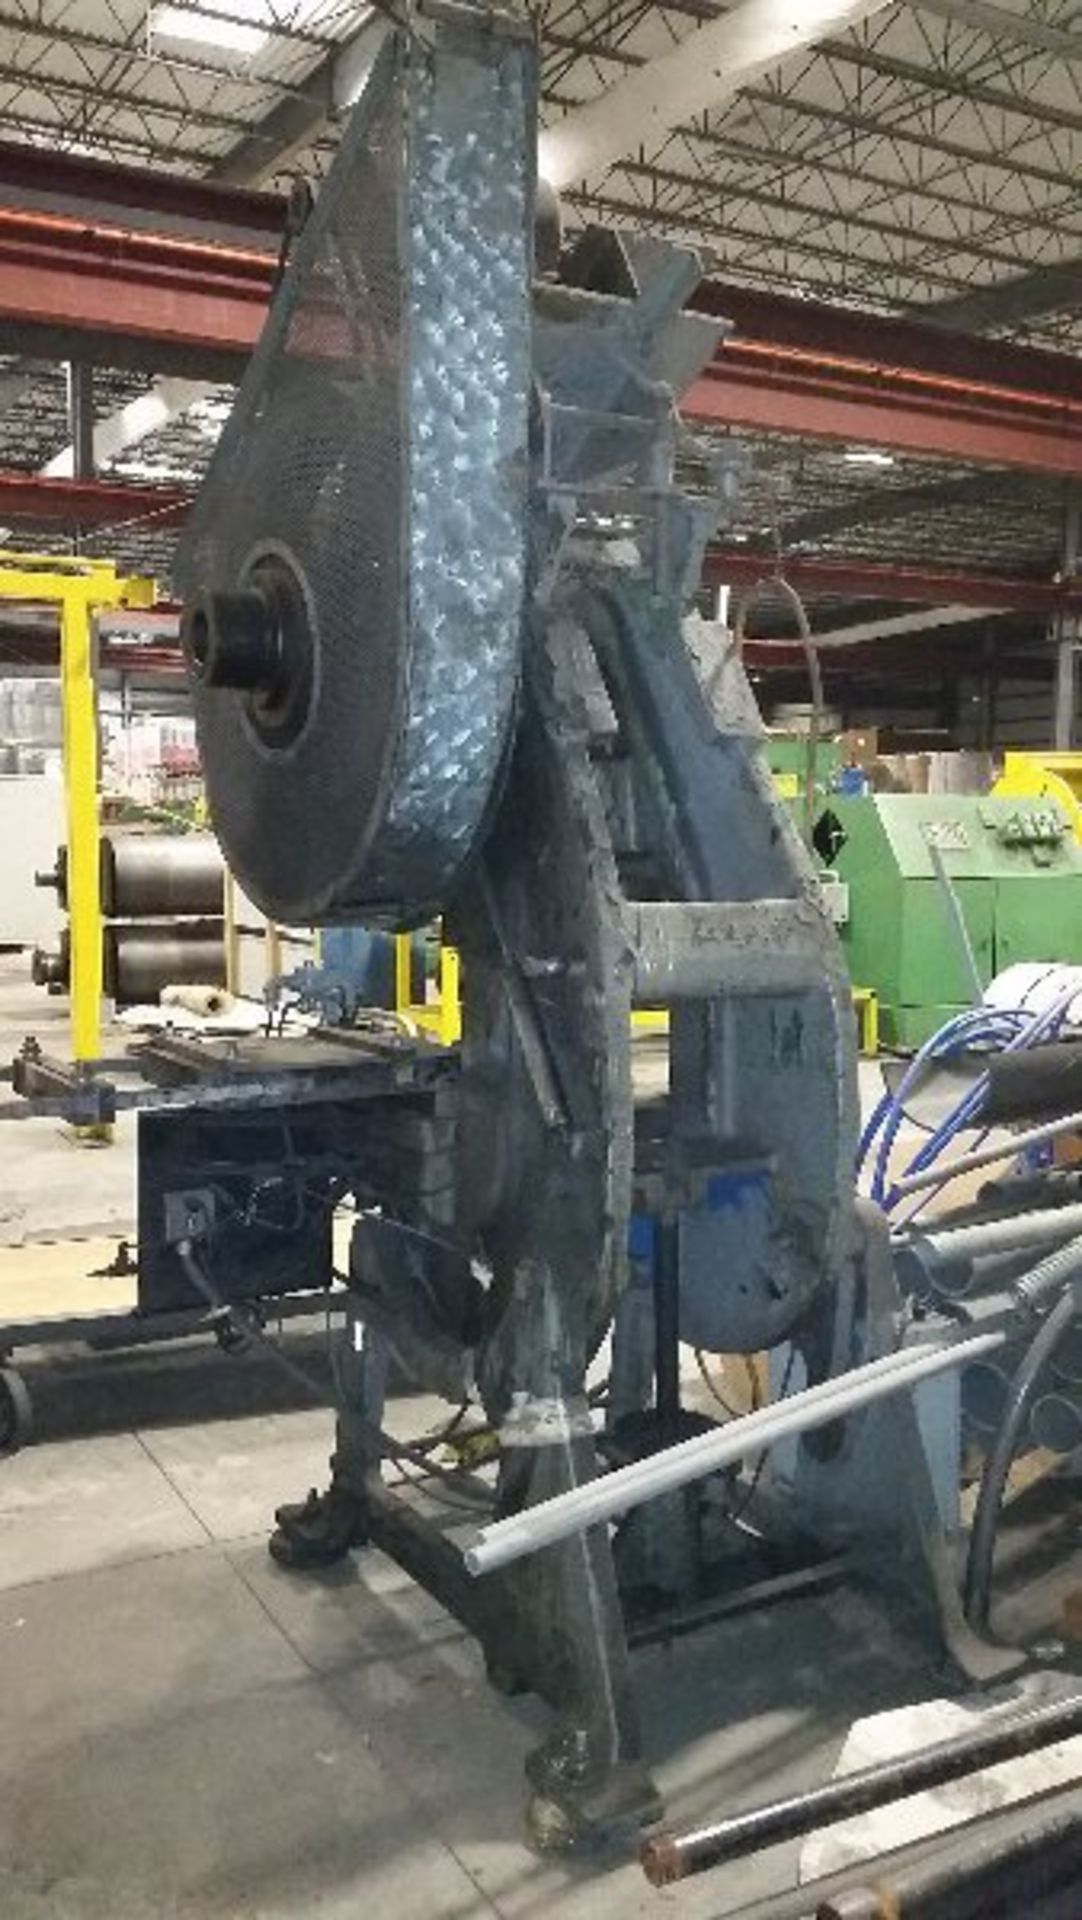 OBI Mechanical Punch Press, 7" Stroke (This item located at 6620 Grant Way, Allentown, PA. Questions